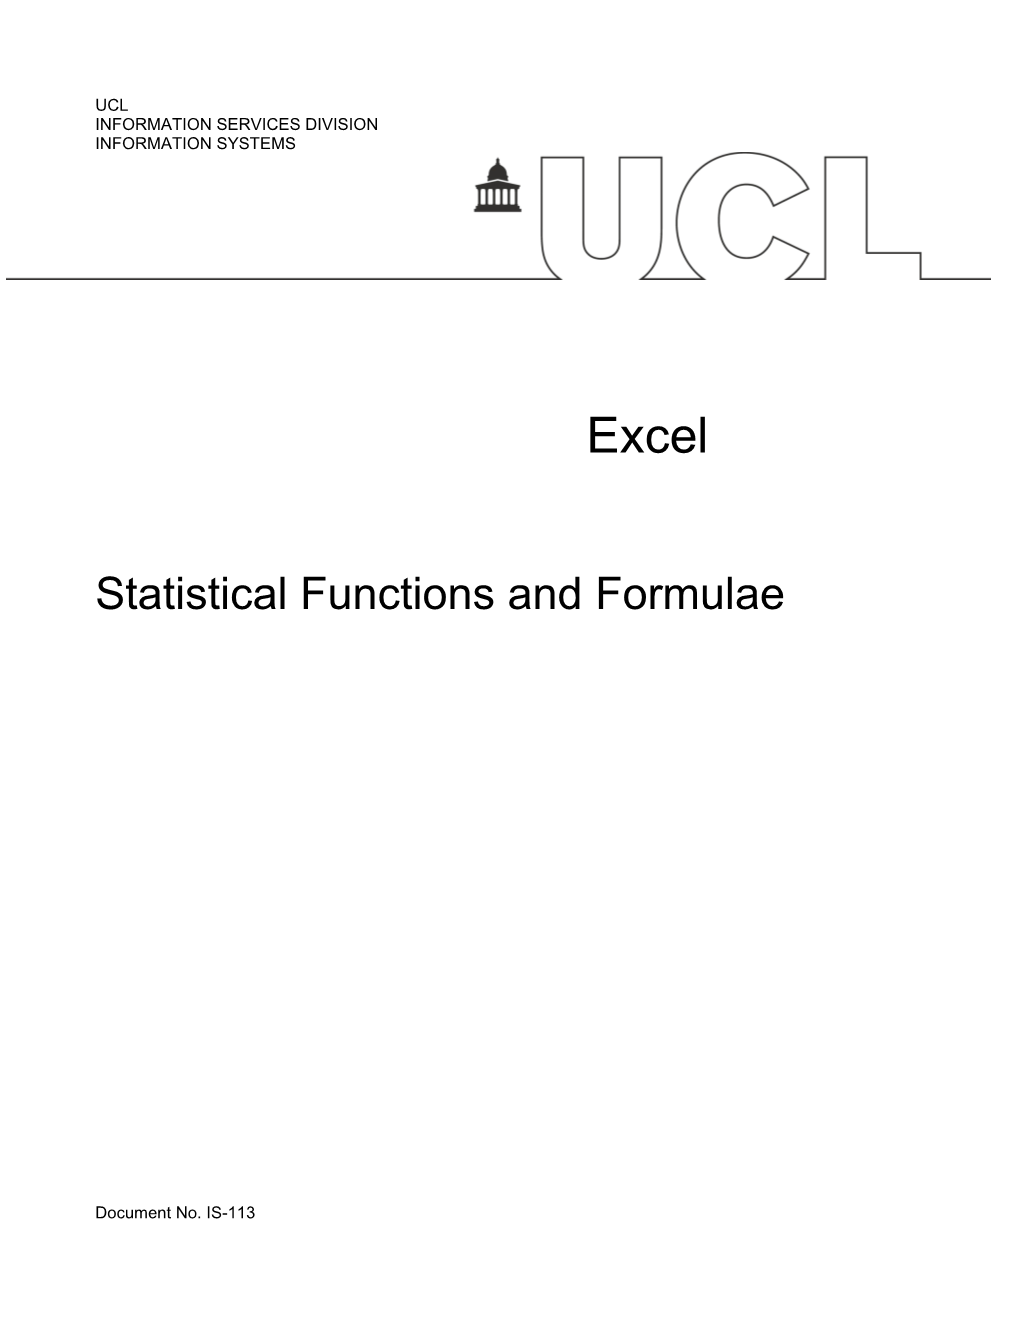 Advanced Excel - Statistical Functions & Formulae